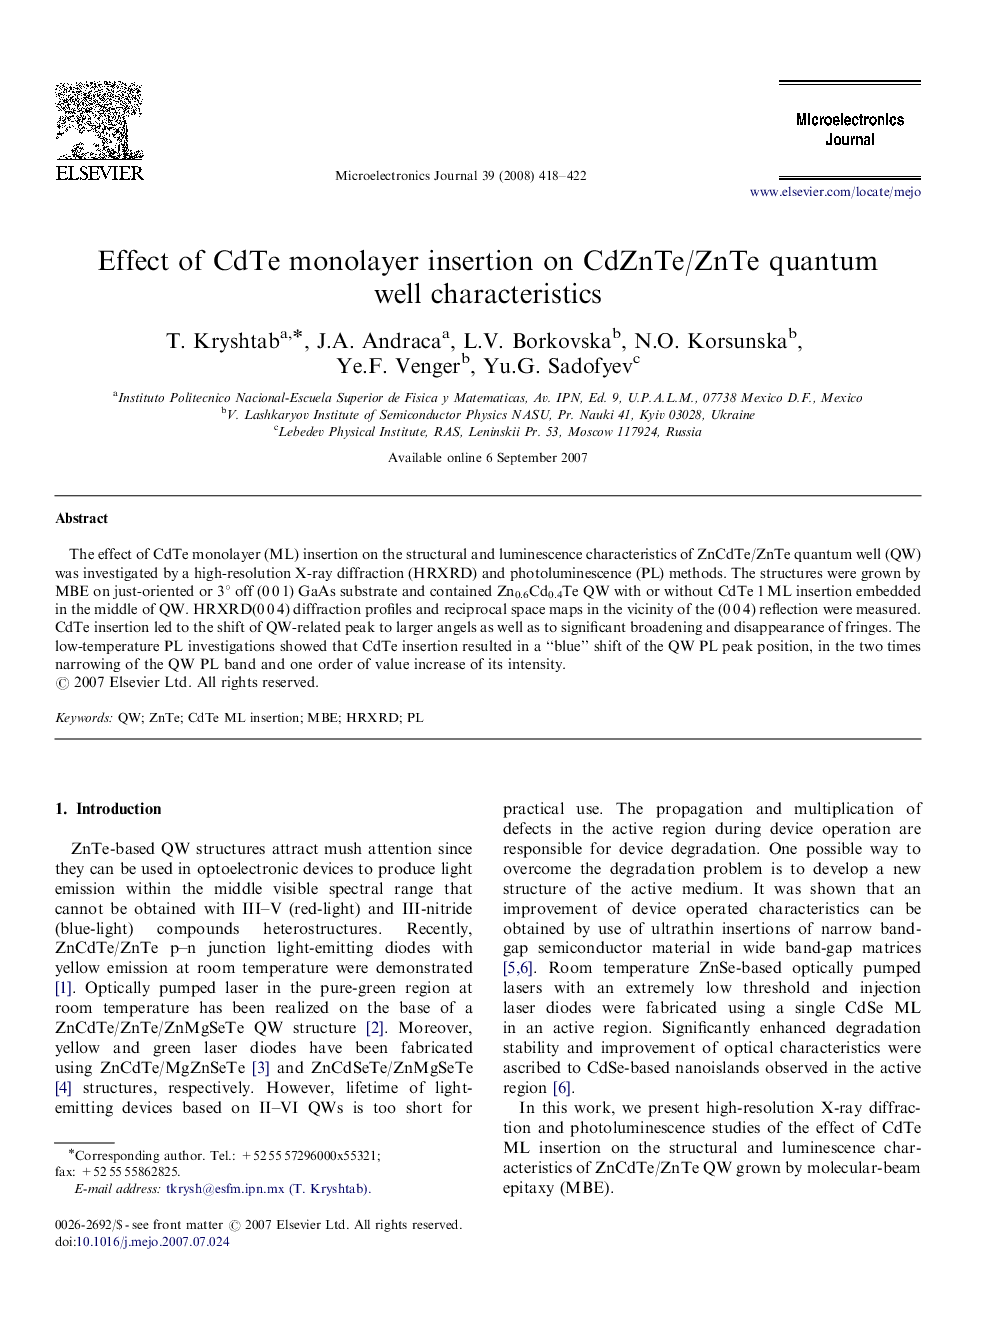 Effect of CdTe monolayer insertion on CdZnTe/ZnTe quantum well characteristics